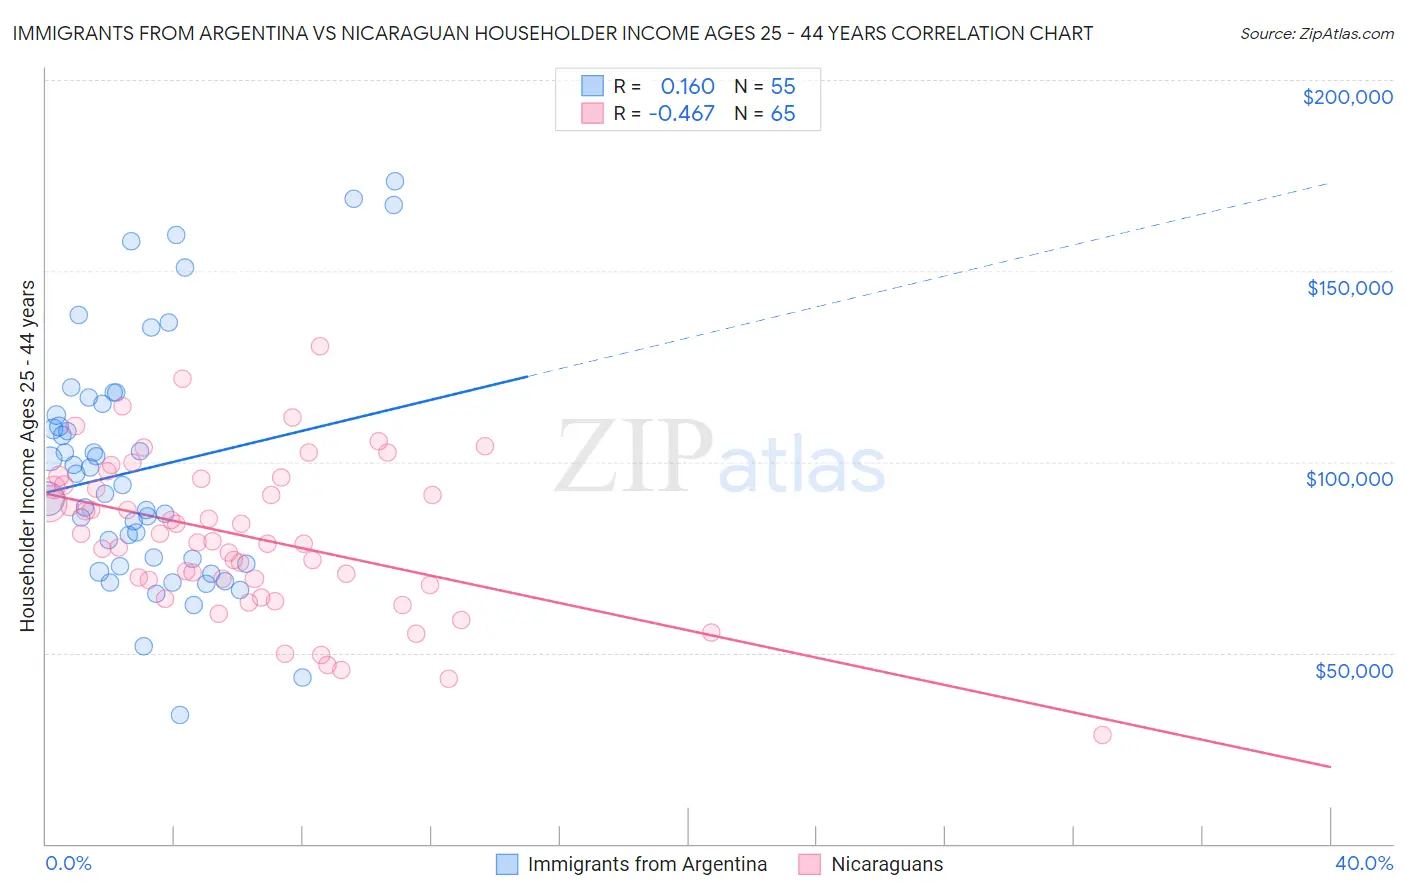 Immigrants from Argentina vs Nicaraguan Householder Income Ages 25 - 44 years